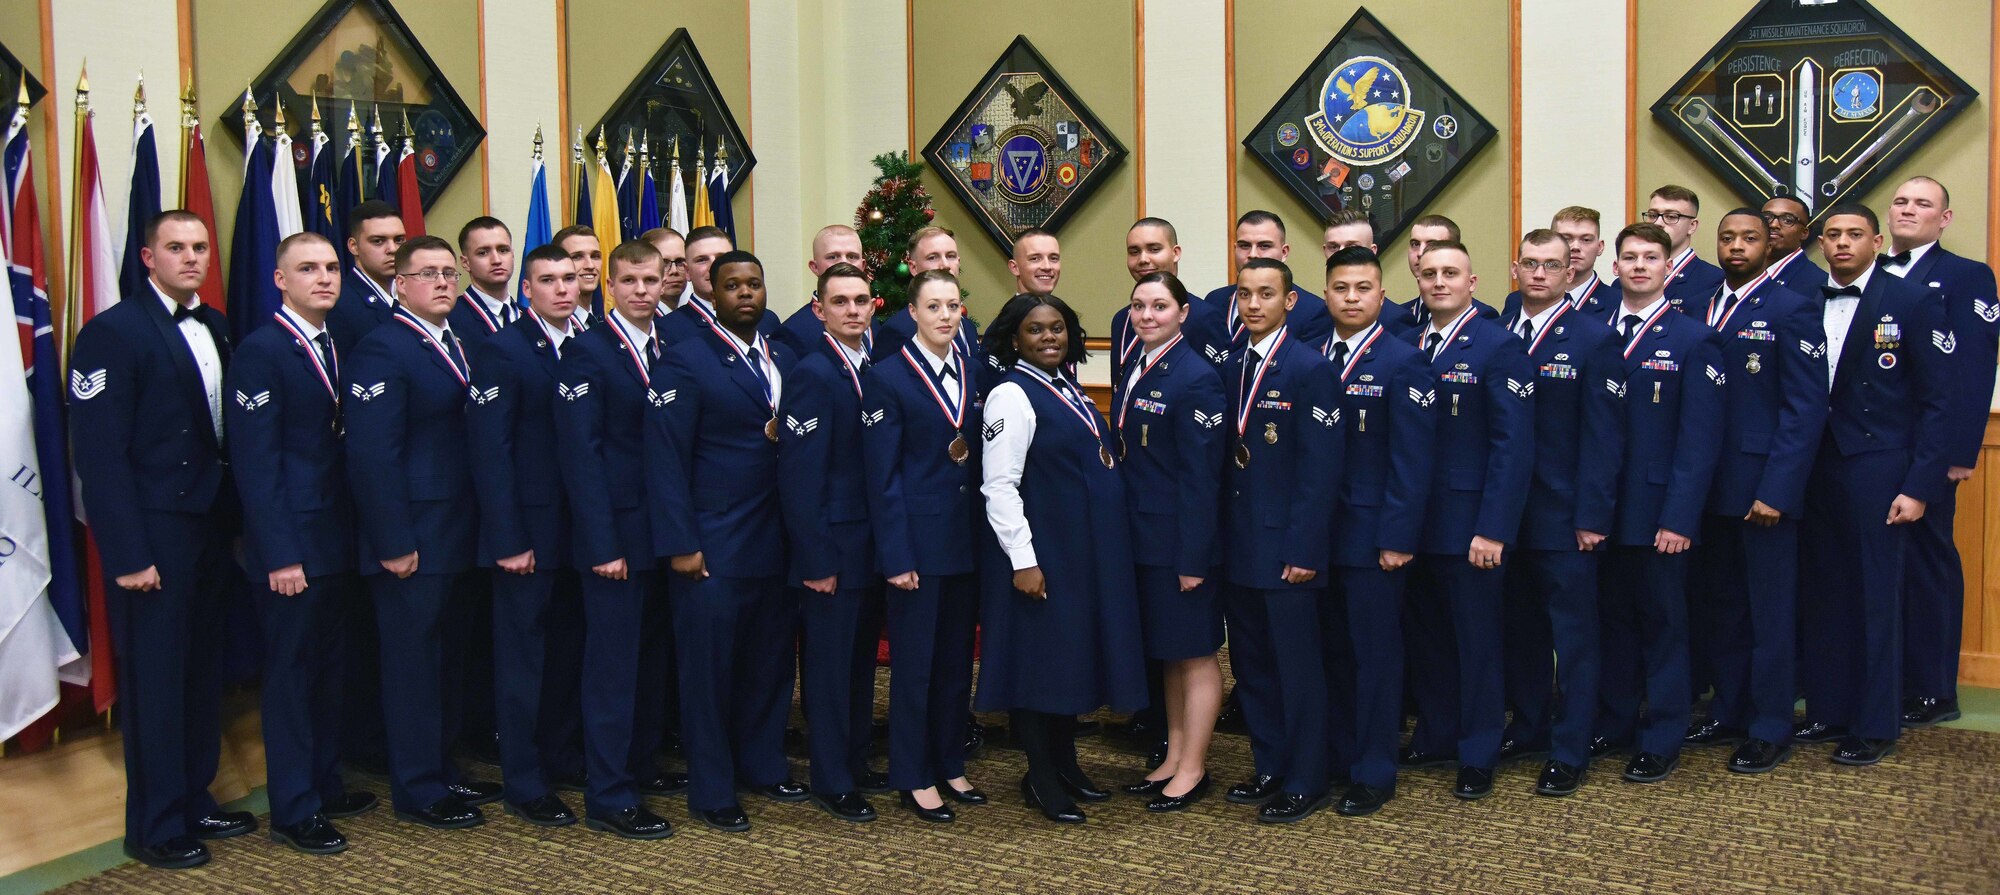 341st Force Support Squadron Airman Leadership School Class 19-B graduated Dec. 19, 2018, at Malmstrom Air Force Base, Mont. Thirty-two Airmen from units across the 341st Missile Wing received their diplomas during a ceremony held at the Grizzly Bend. (U.S. Air Force by Senior Airman Magen M. Reeves)